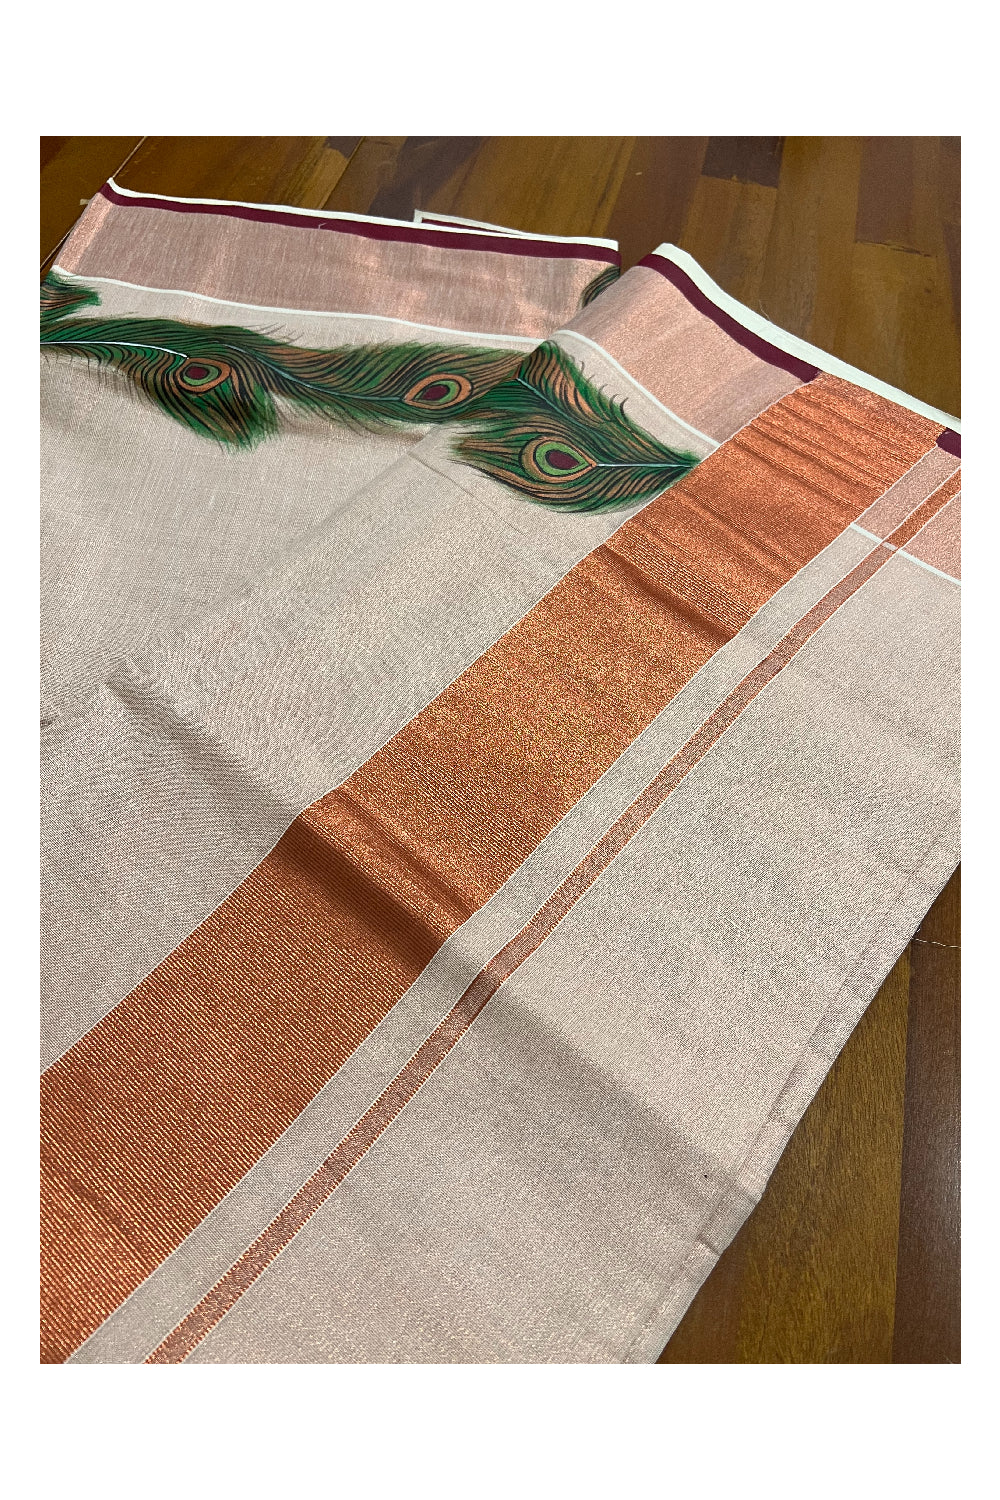 Southloom Onam 2022 Copper Tissue Kasavu Saree with Hand Painted Mural Artwork